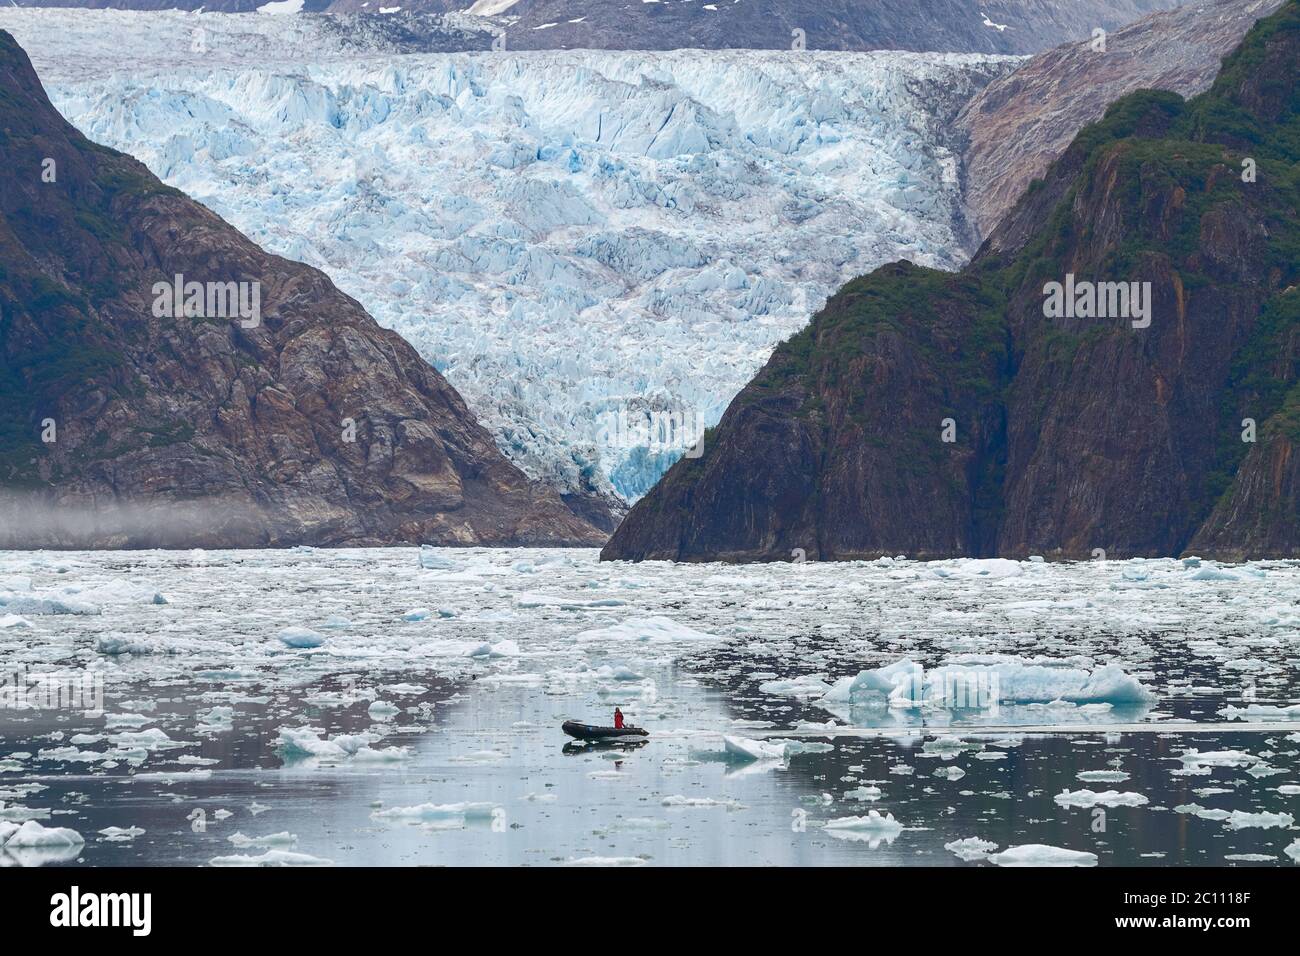 Man in Boat in Front of Sawyer Glacier at Tracy Arms Fjords in Alaska United States. Stock Photo